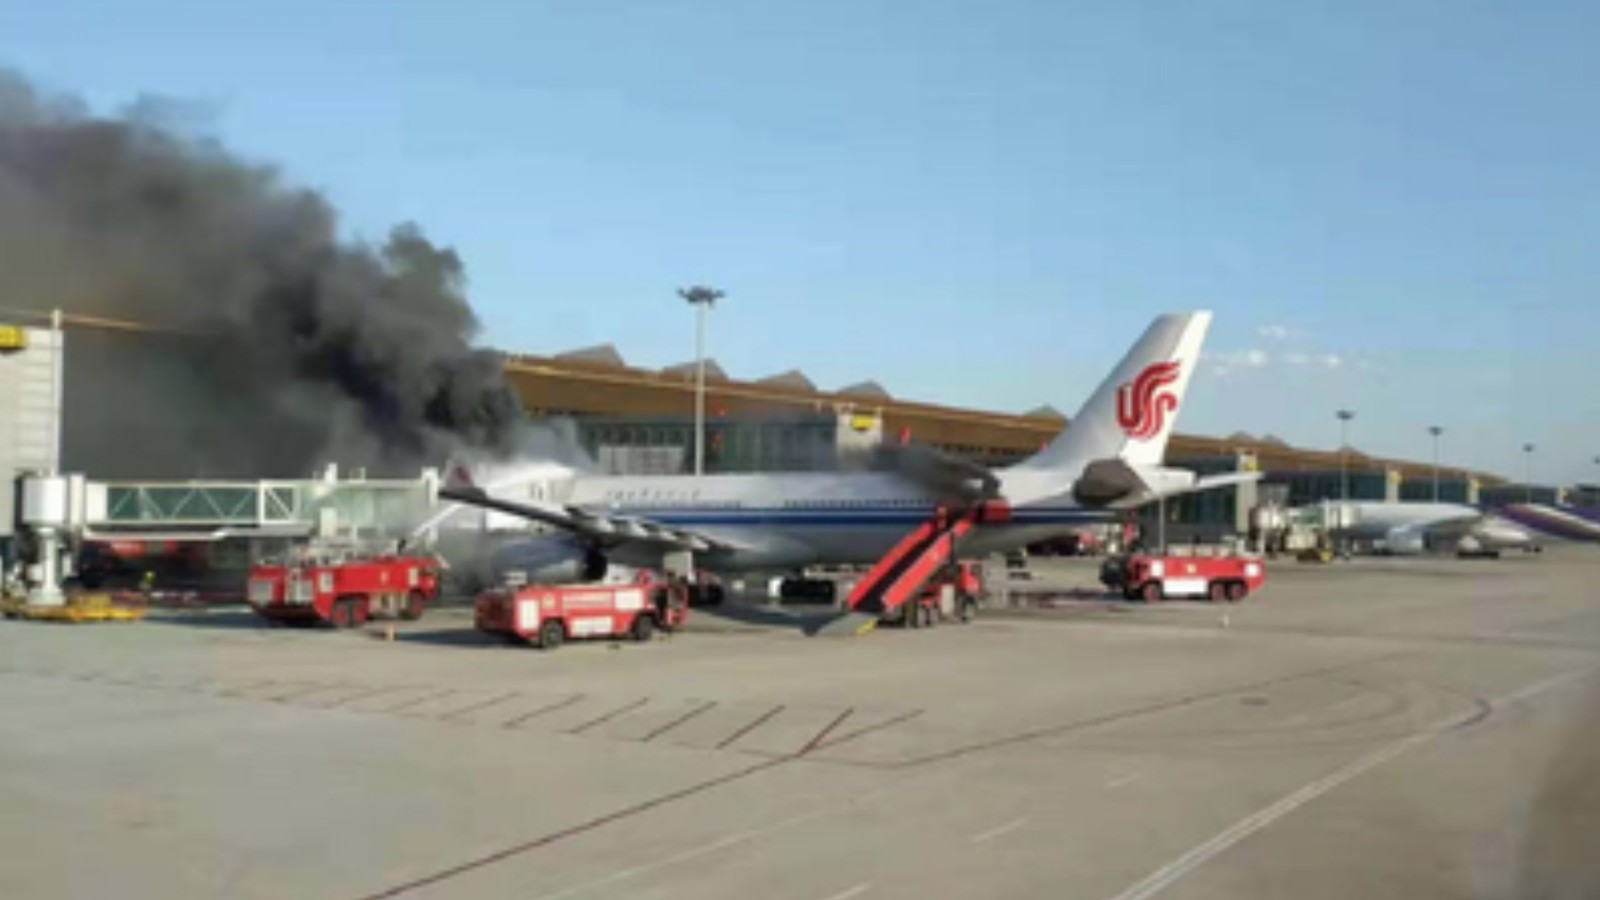 Air China A330 at Capital Airport is suspected to have caught fire from smoke and burned through the top. Fortunately, no casualties occurred.